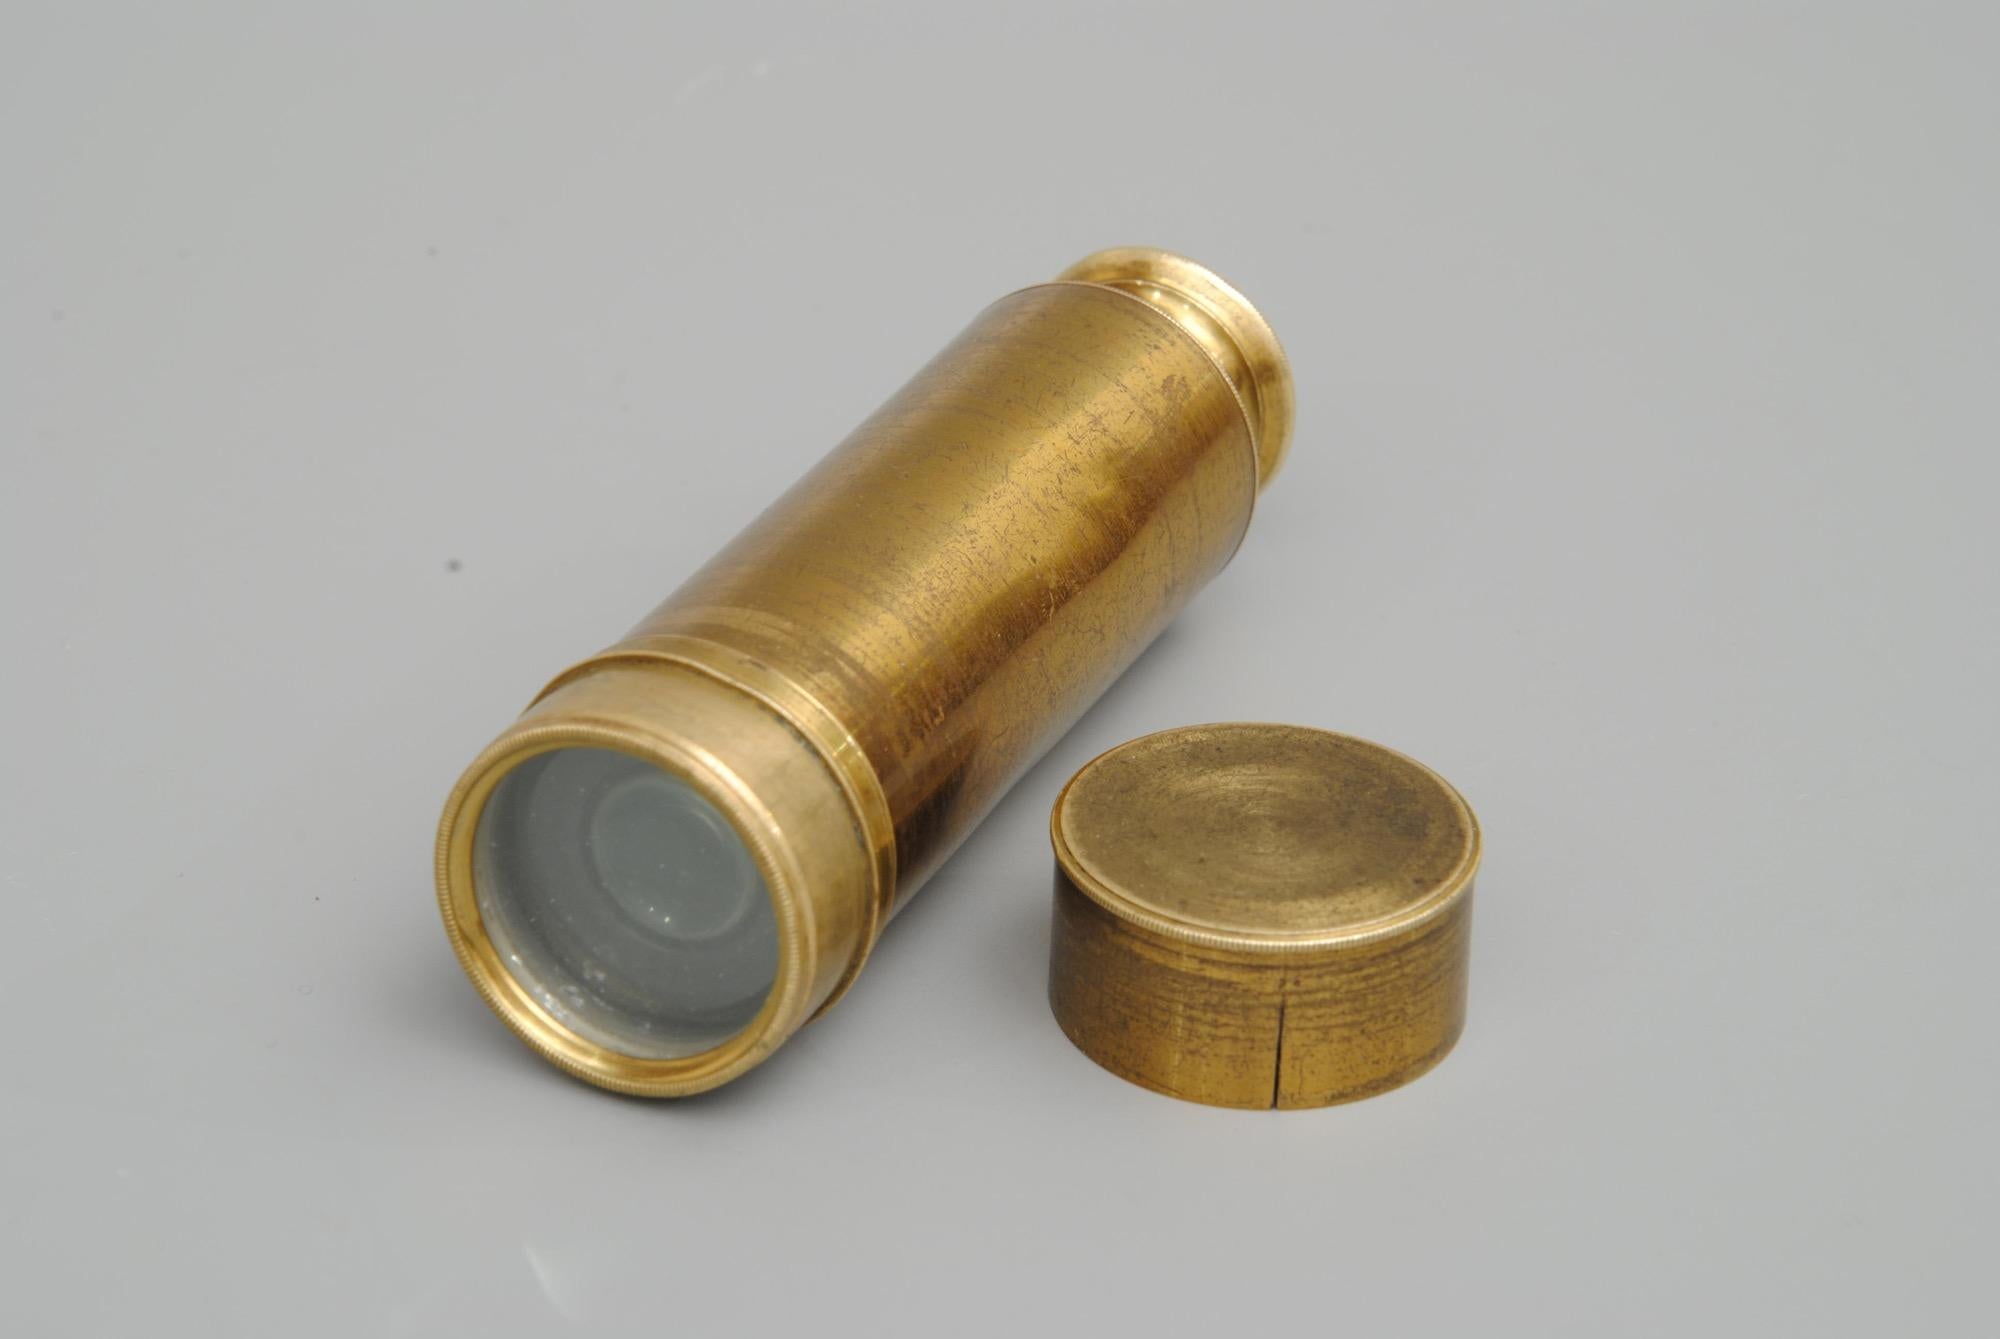 An early 19th century lacquered brass six drawer pocket telescope by Cary, London. Unusual focusing line on the second drawer, the scope complete with end cap.